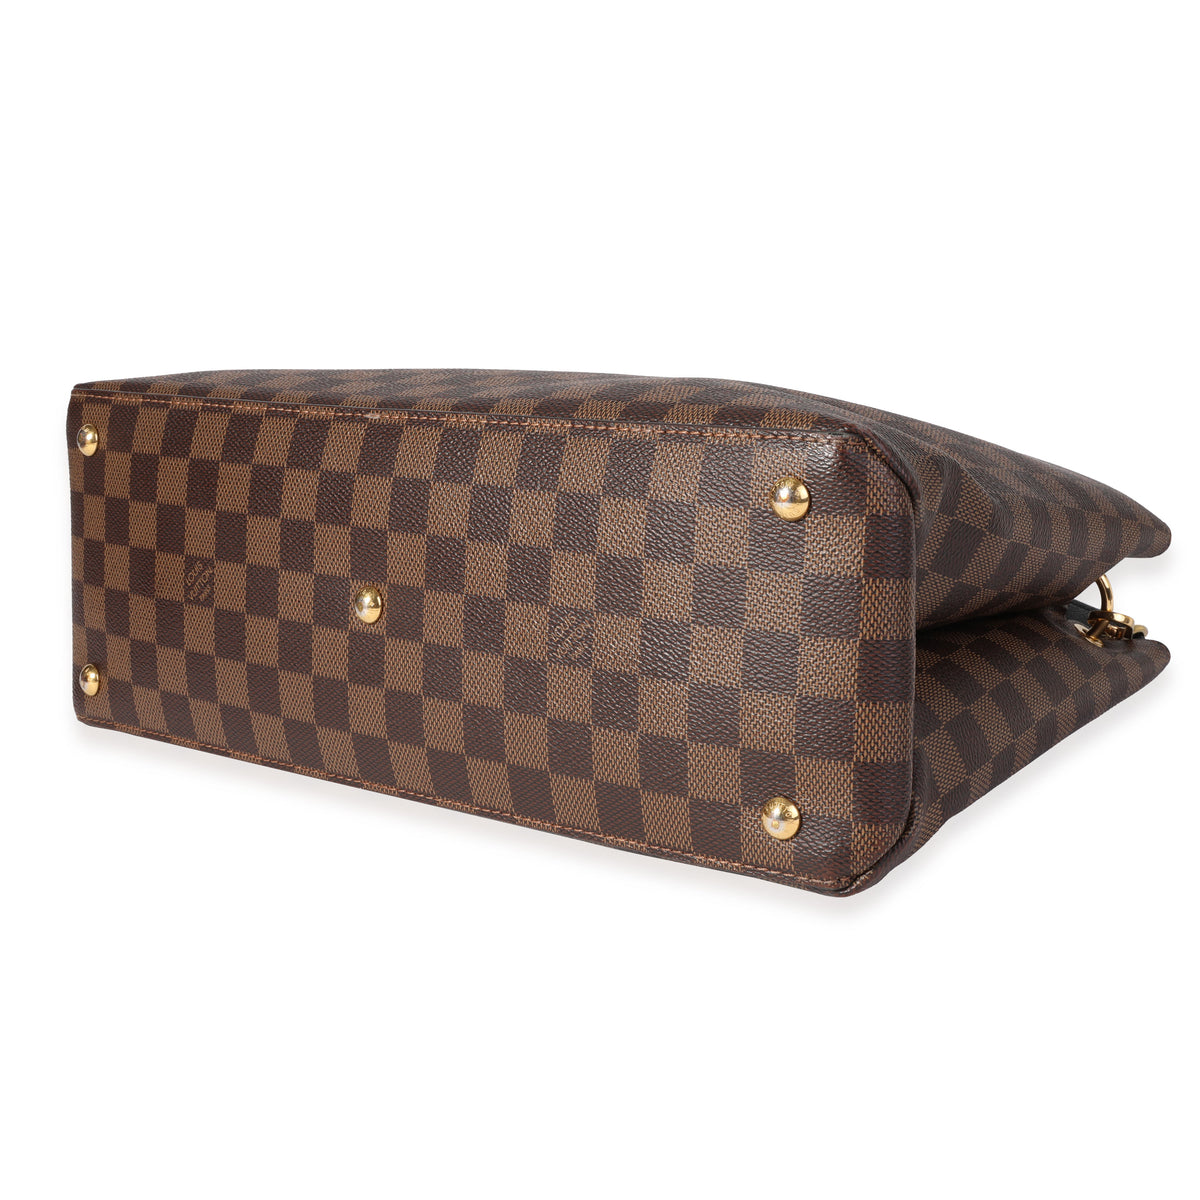 Love this great classic Louis Vuitton Damier Riverside Bag with